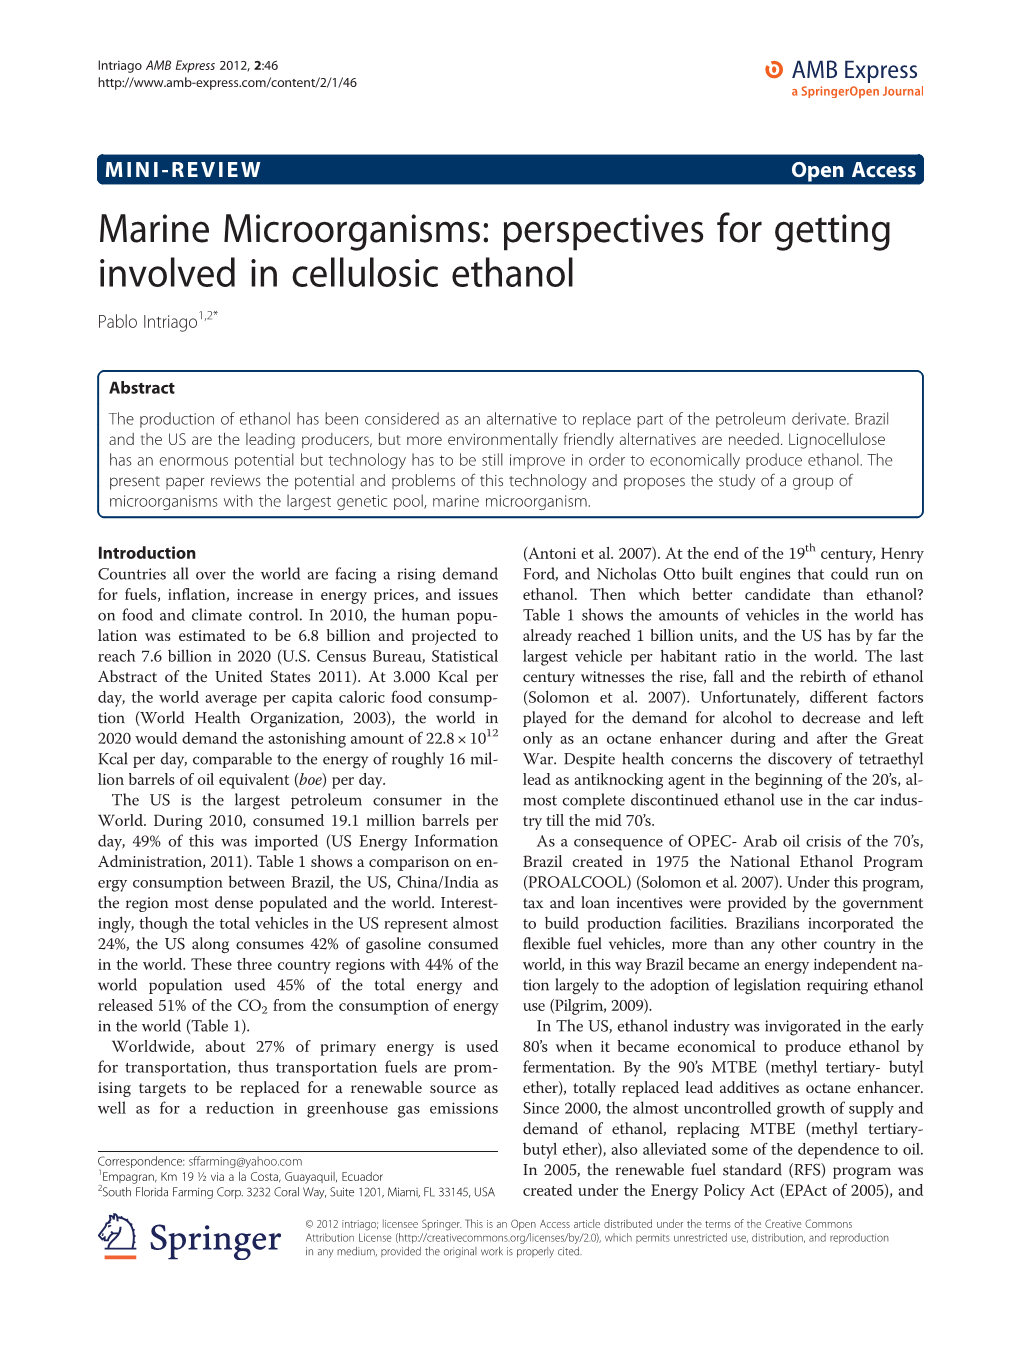 Marine Microorganisms: Perspectives for Getting Involved in Cellulosic Ethanol Pablo Intriago1,2*